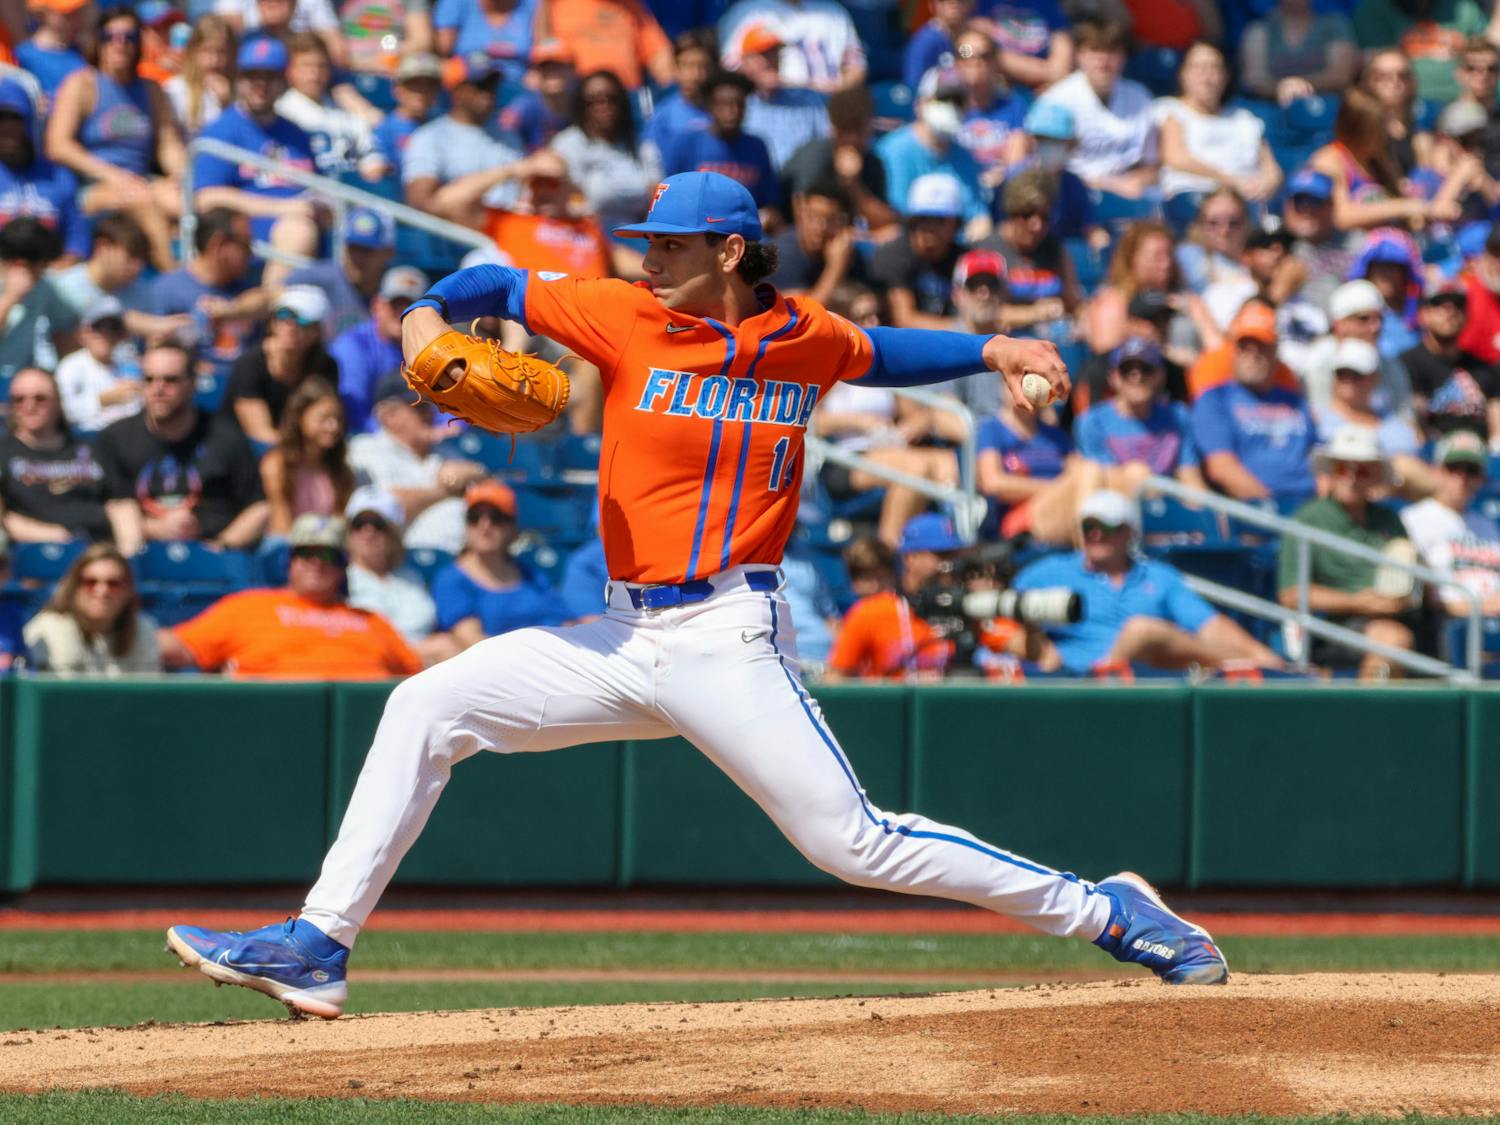 Florida sophomore Jac Caglianone pitches the ball in the Gators's 14-4 mercy-rule win against the No. 22 Miami Hurricanes at Condron Ballpark Sunday, March 5, 2023.